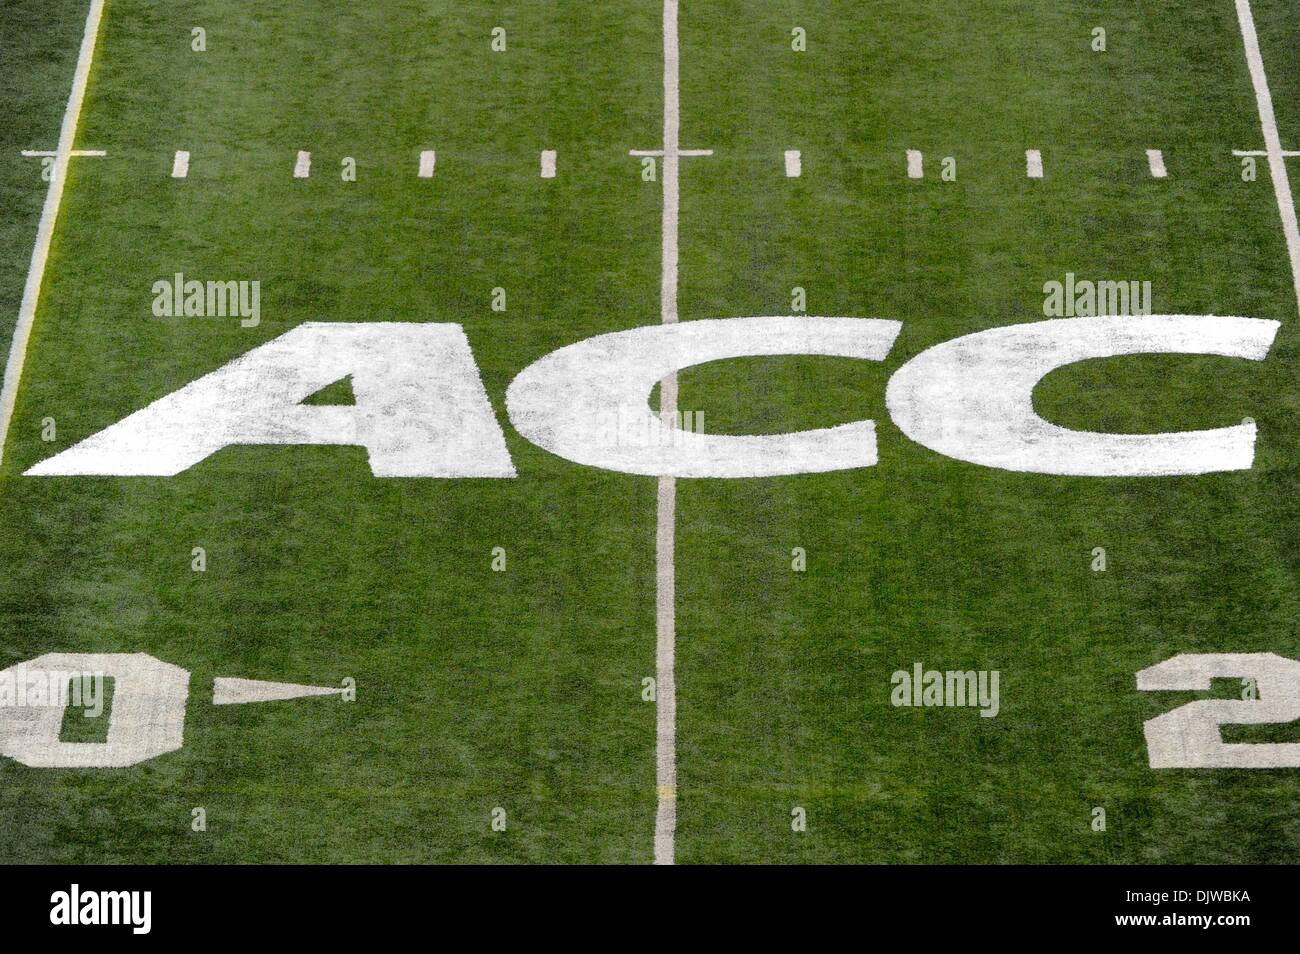 Syracuse, New York, USA. 30th Nov, 2013. November 30, 2013: General view of the Atlantic Coast Conference logo on the field prior to an NCAA Football game between the Boston College Eagles and the Syracuse Orange at the Carrier Dome in Syracuse, New York. Rich Barnes/CSM/Alamy Live News Stock Photo